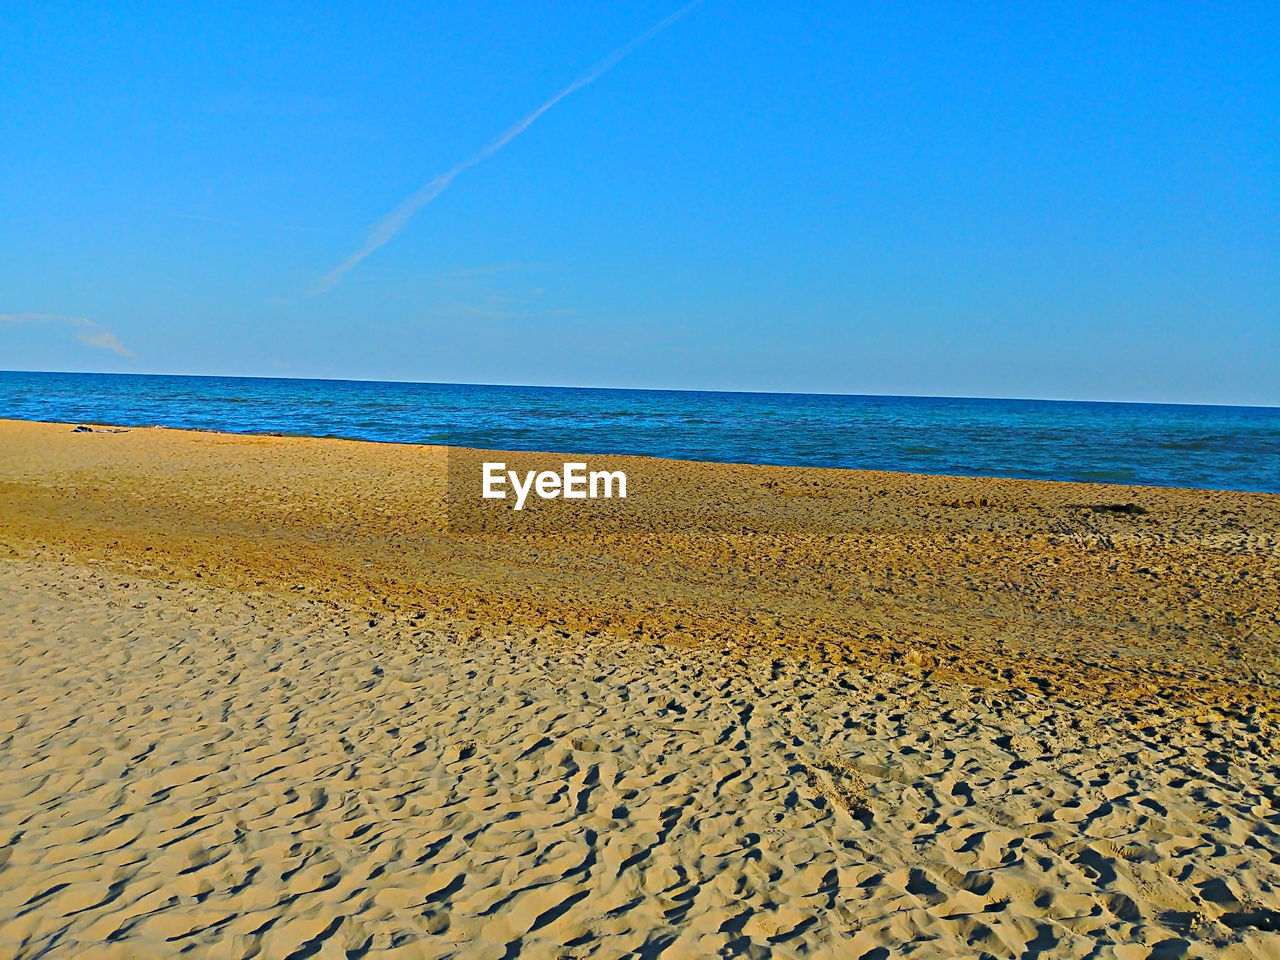 SCENIC VIEW OF SEA SHORE AGAINST CLEAR BLUE SKY